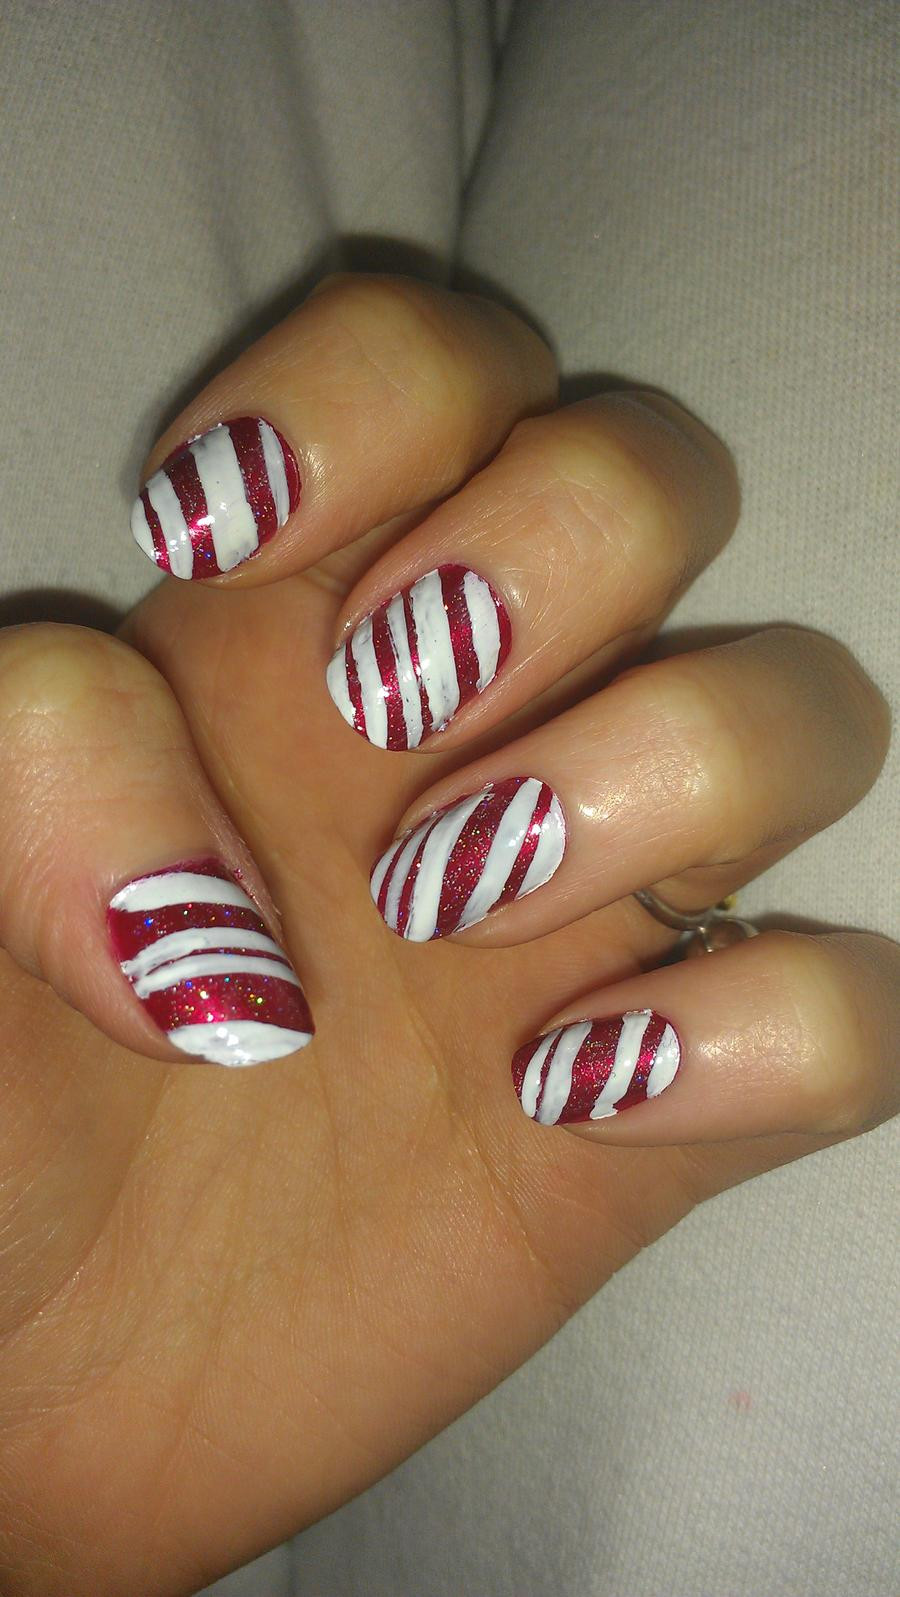 Candy Cane Nail Art
 Candy cane nails by rabbithat8 on deviantART